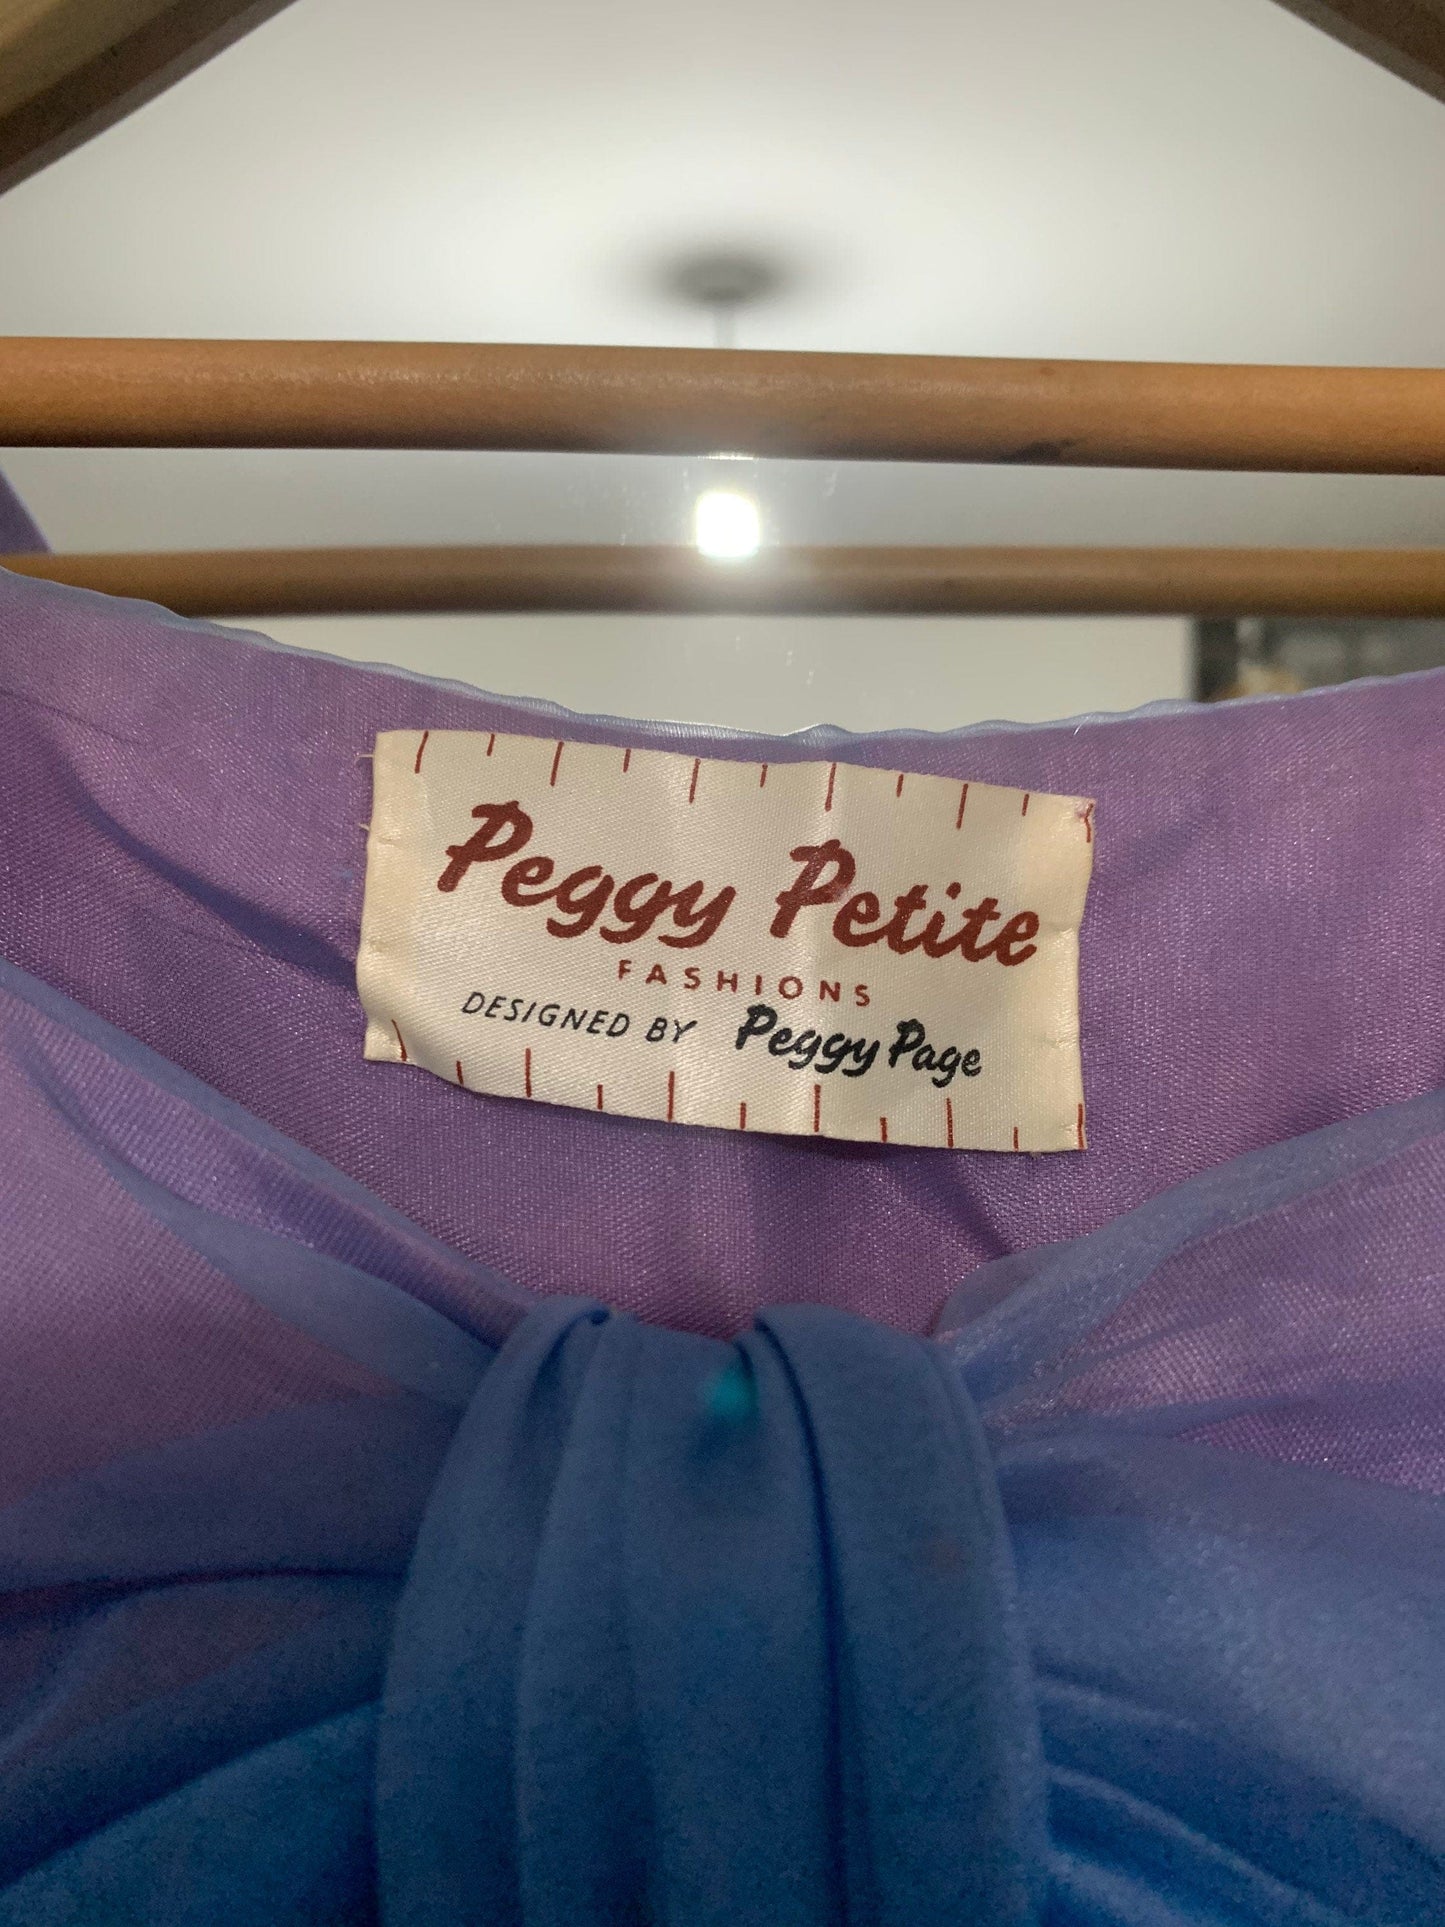 1950s Purple Blue Swing Dress Chiffon Overlayer Semi Sheer Skirt by Peggy Petite designed by Peggy Page